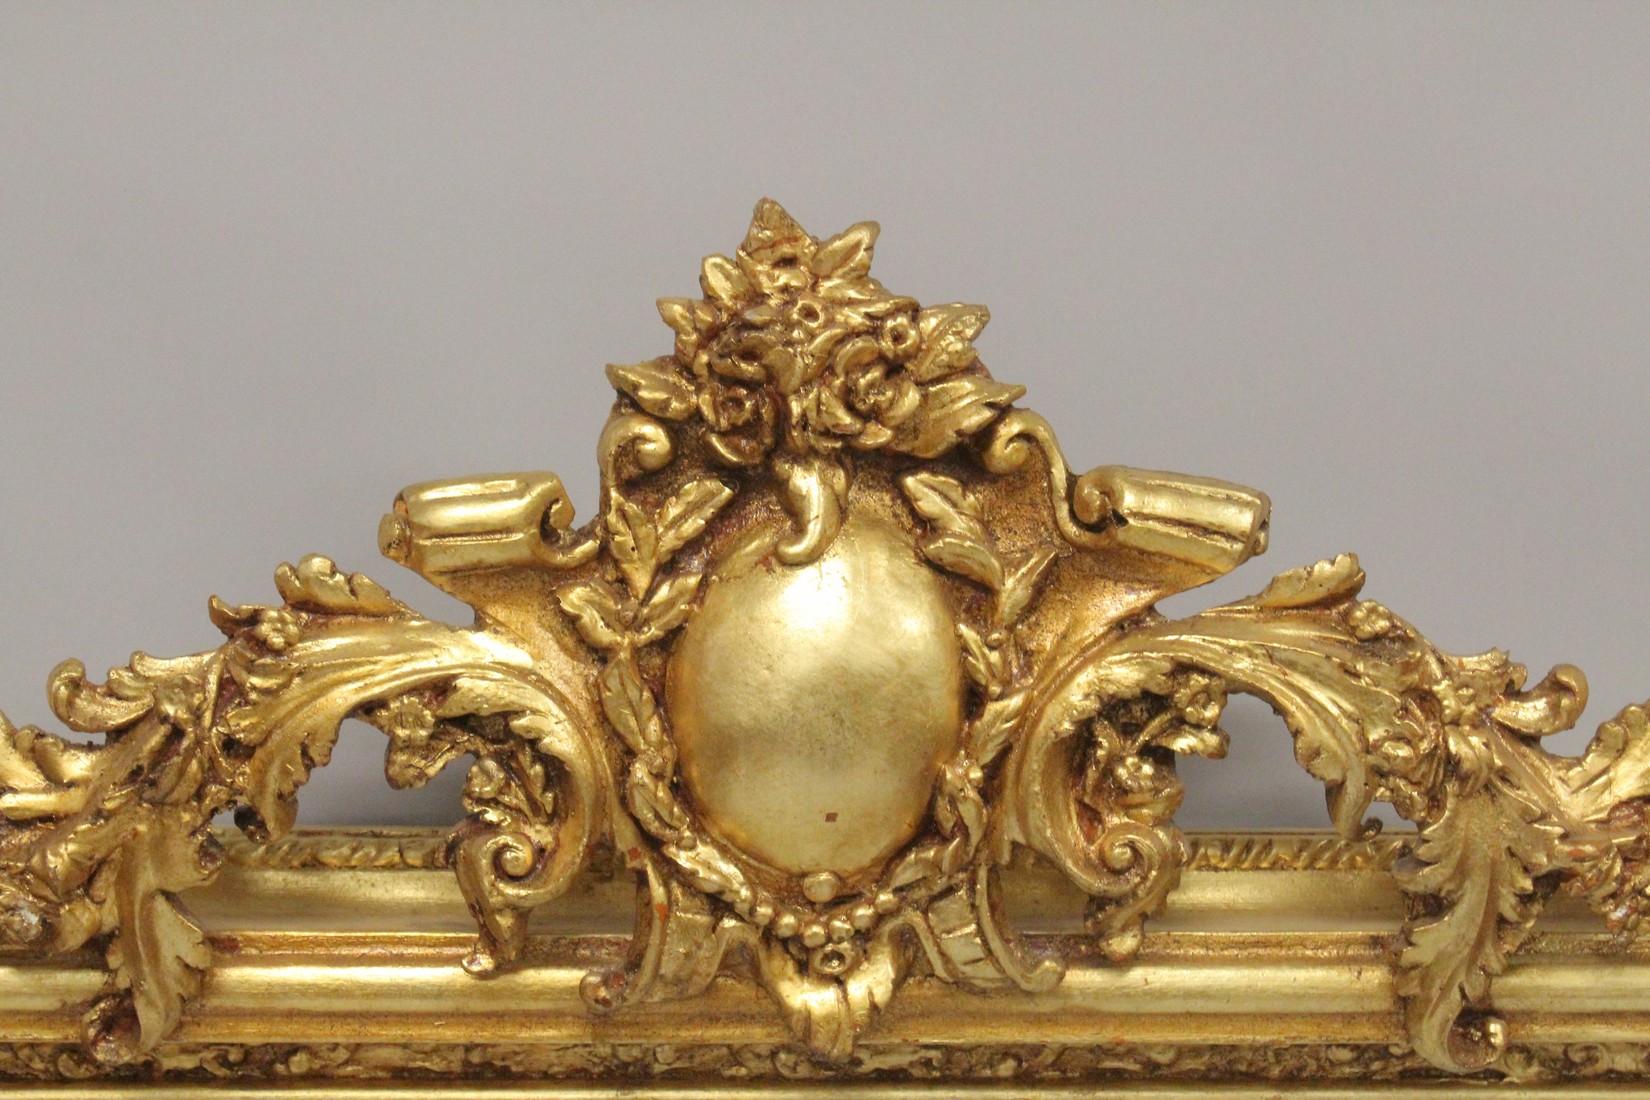 A LARGE GILTWOOD OVER MANTLE MIRROR with scrolls and cupids. 5ft 6ins high, 4ft 8ins wide. - Image 2 of 4